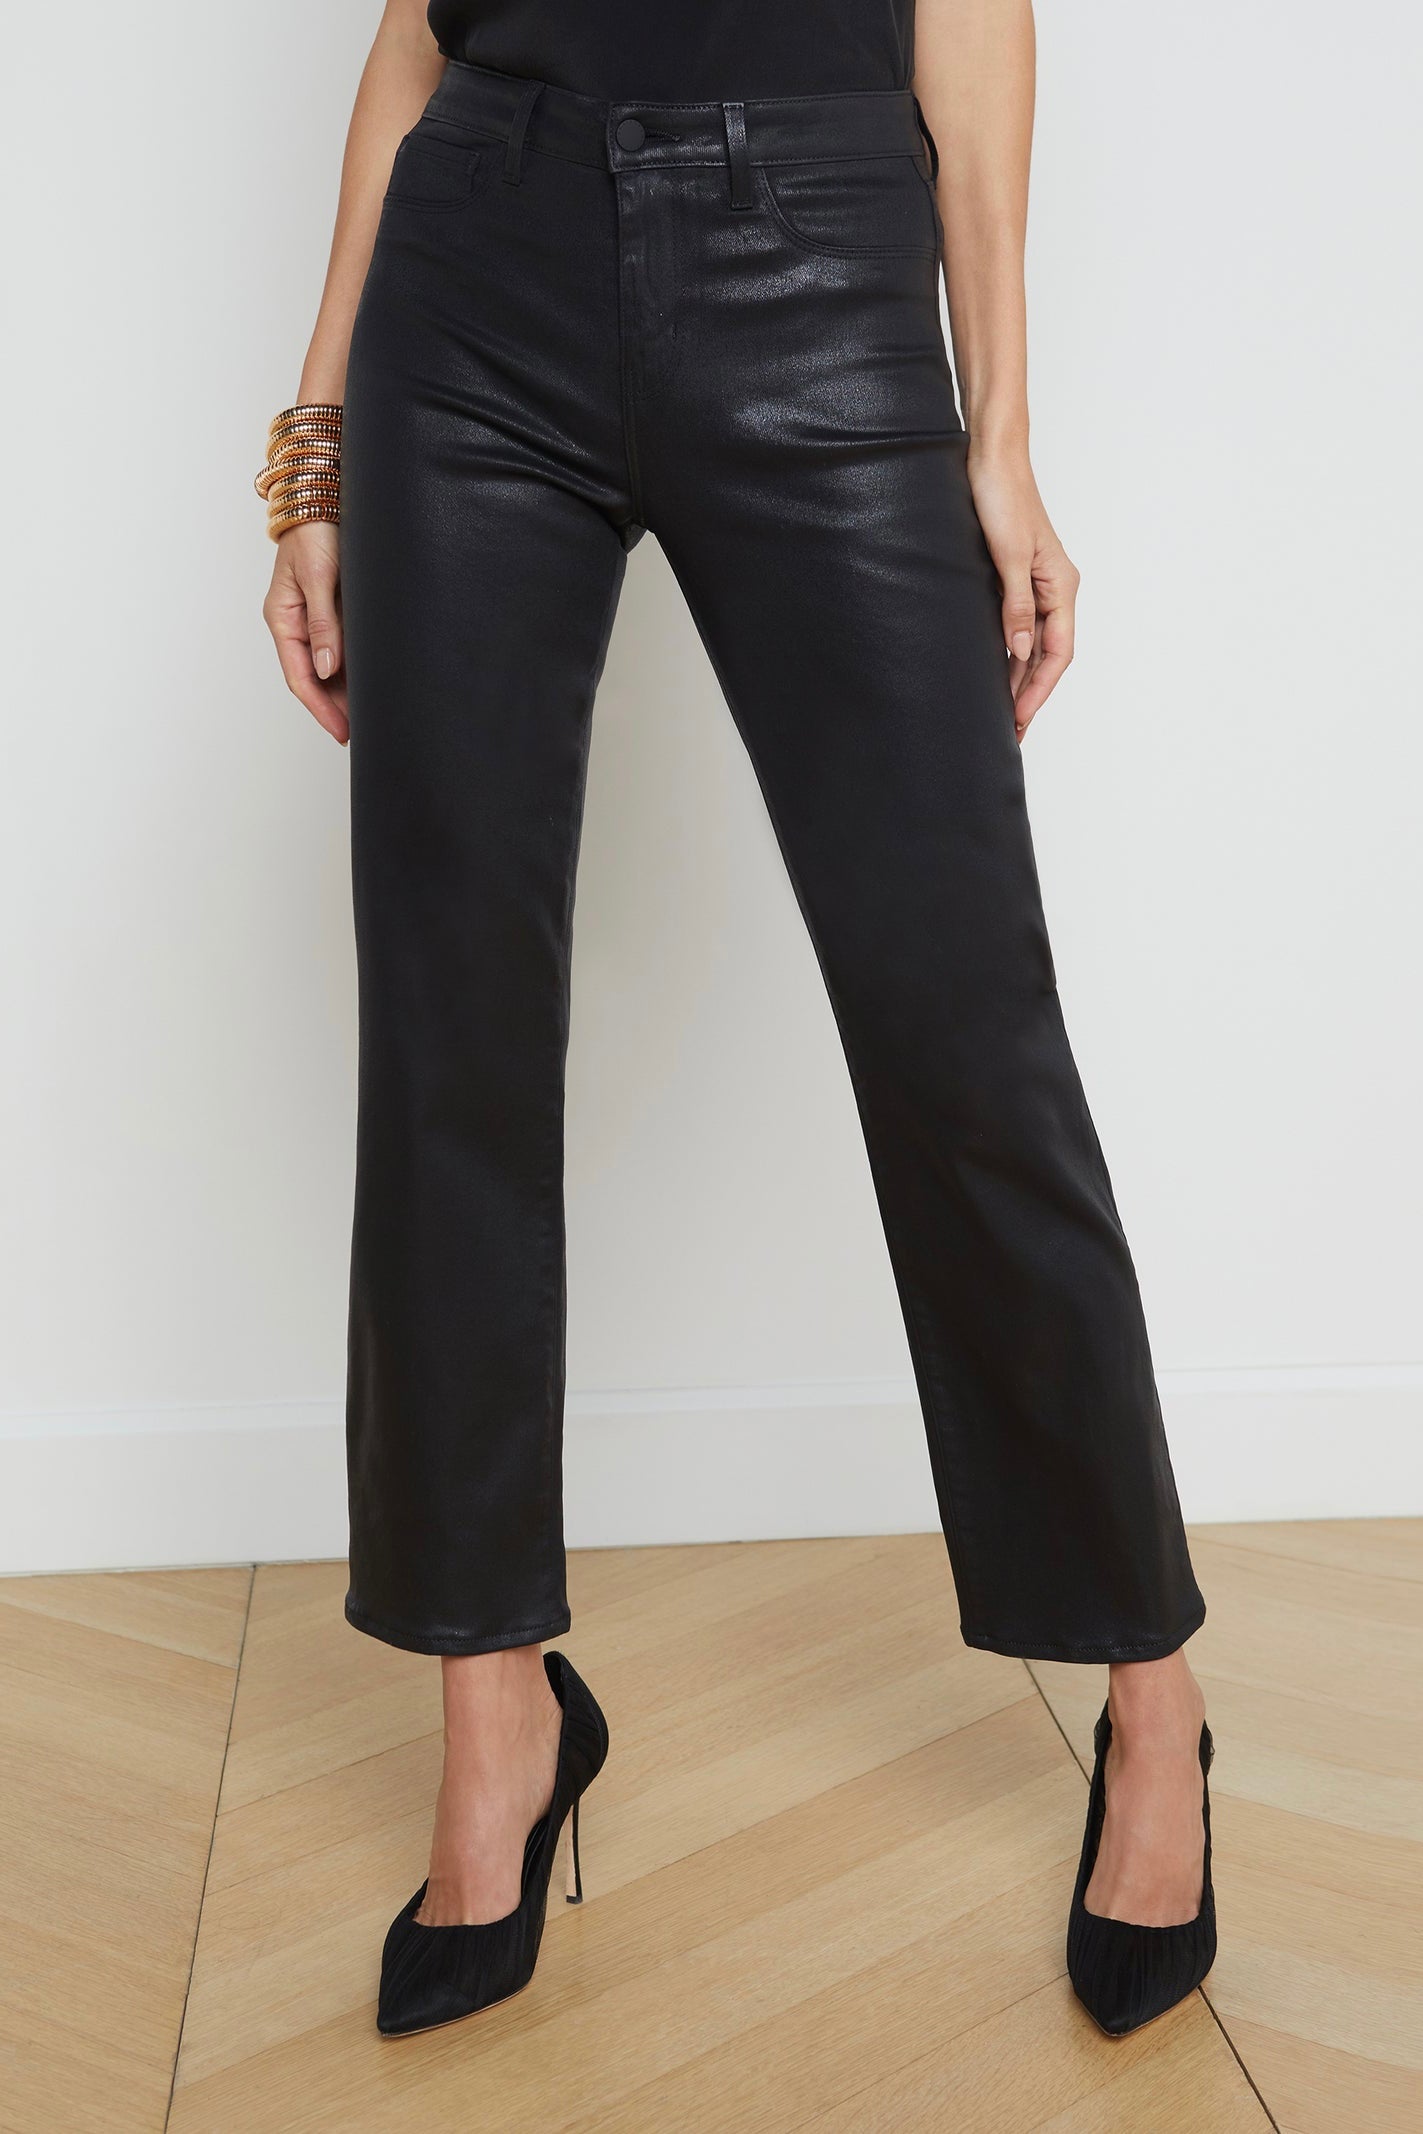 L'Agence Ginny Coated Jeans with Zipper Detail